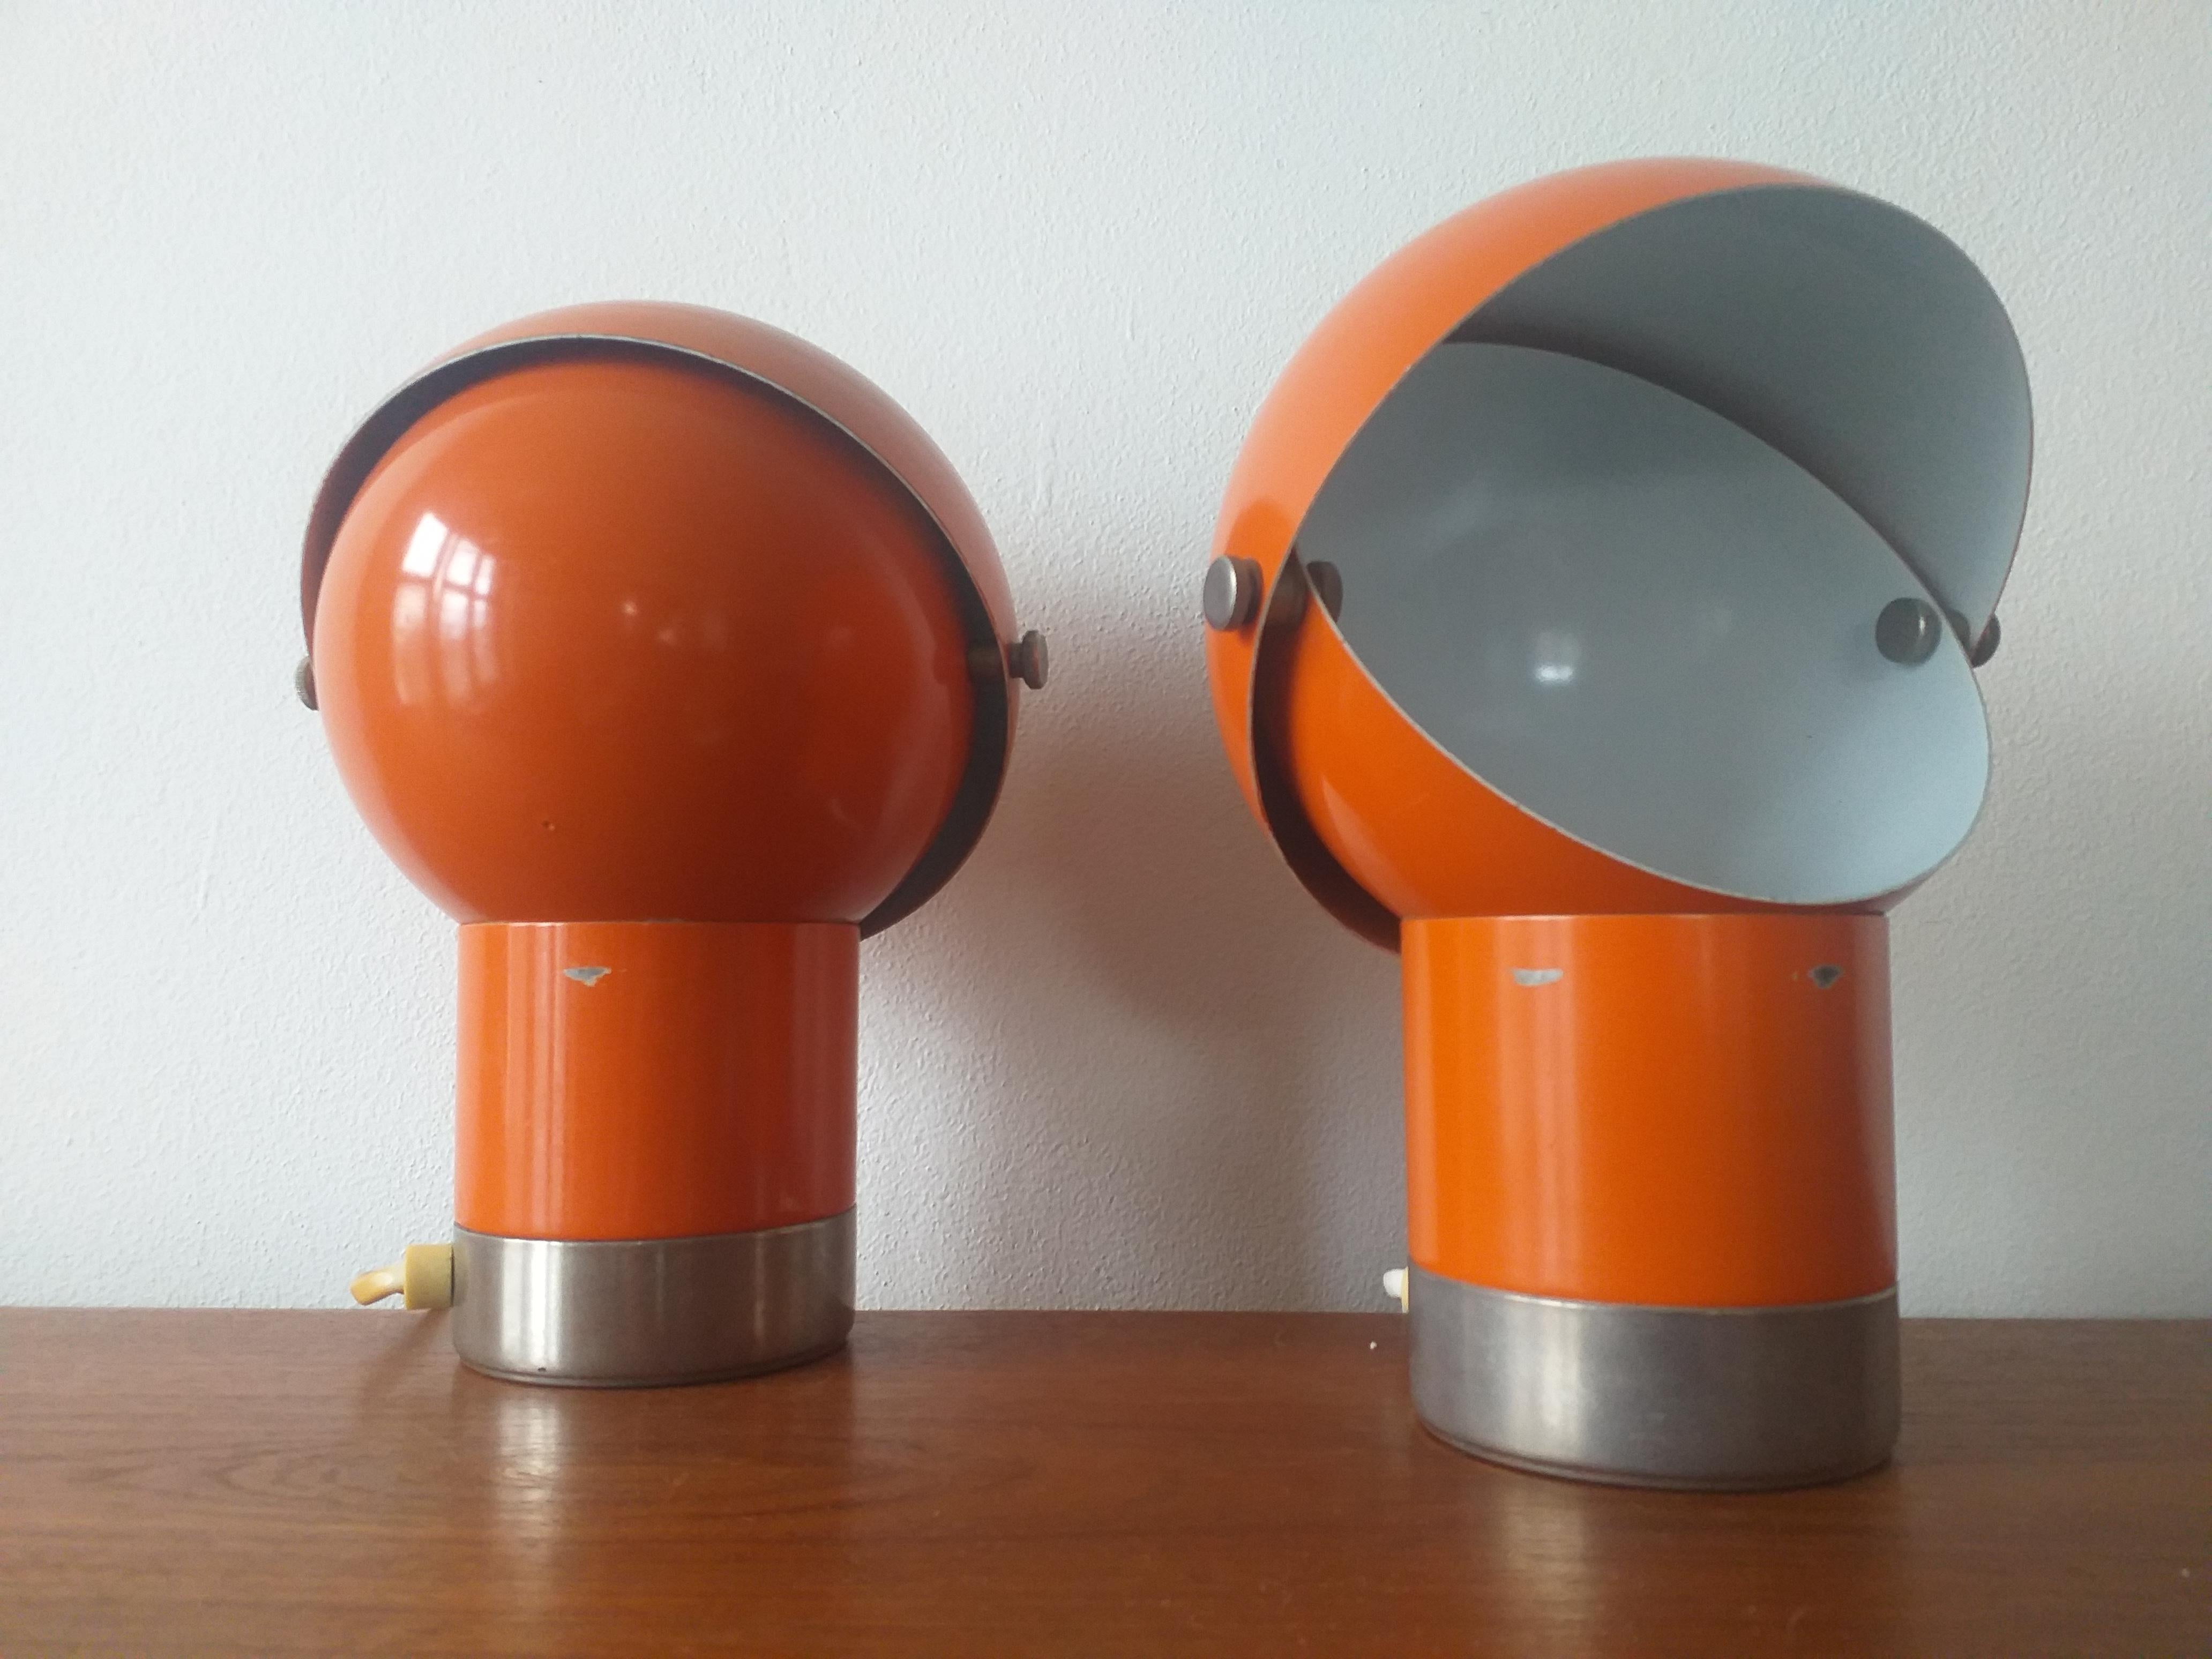 Lacquered Pair of Midcentury Table Lamps Designed by Pavel Grus, Kamenicky Senov, 1960s